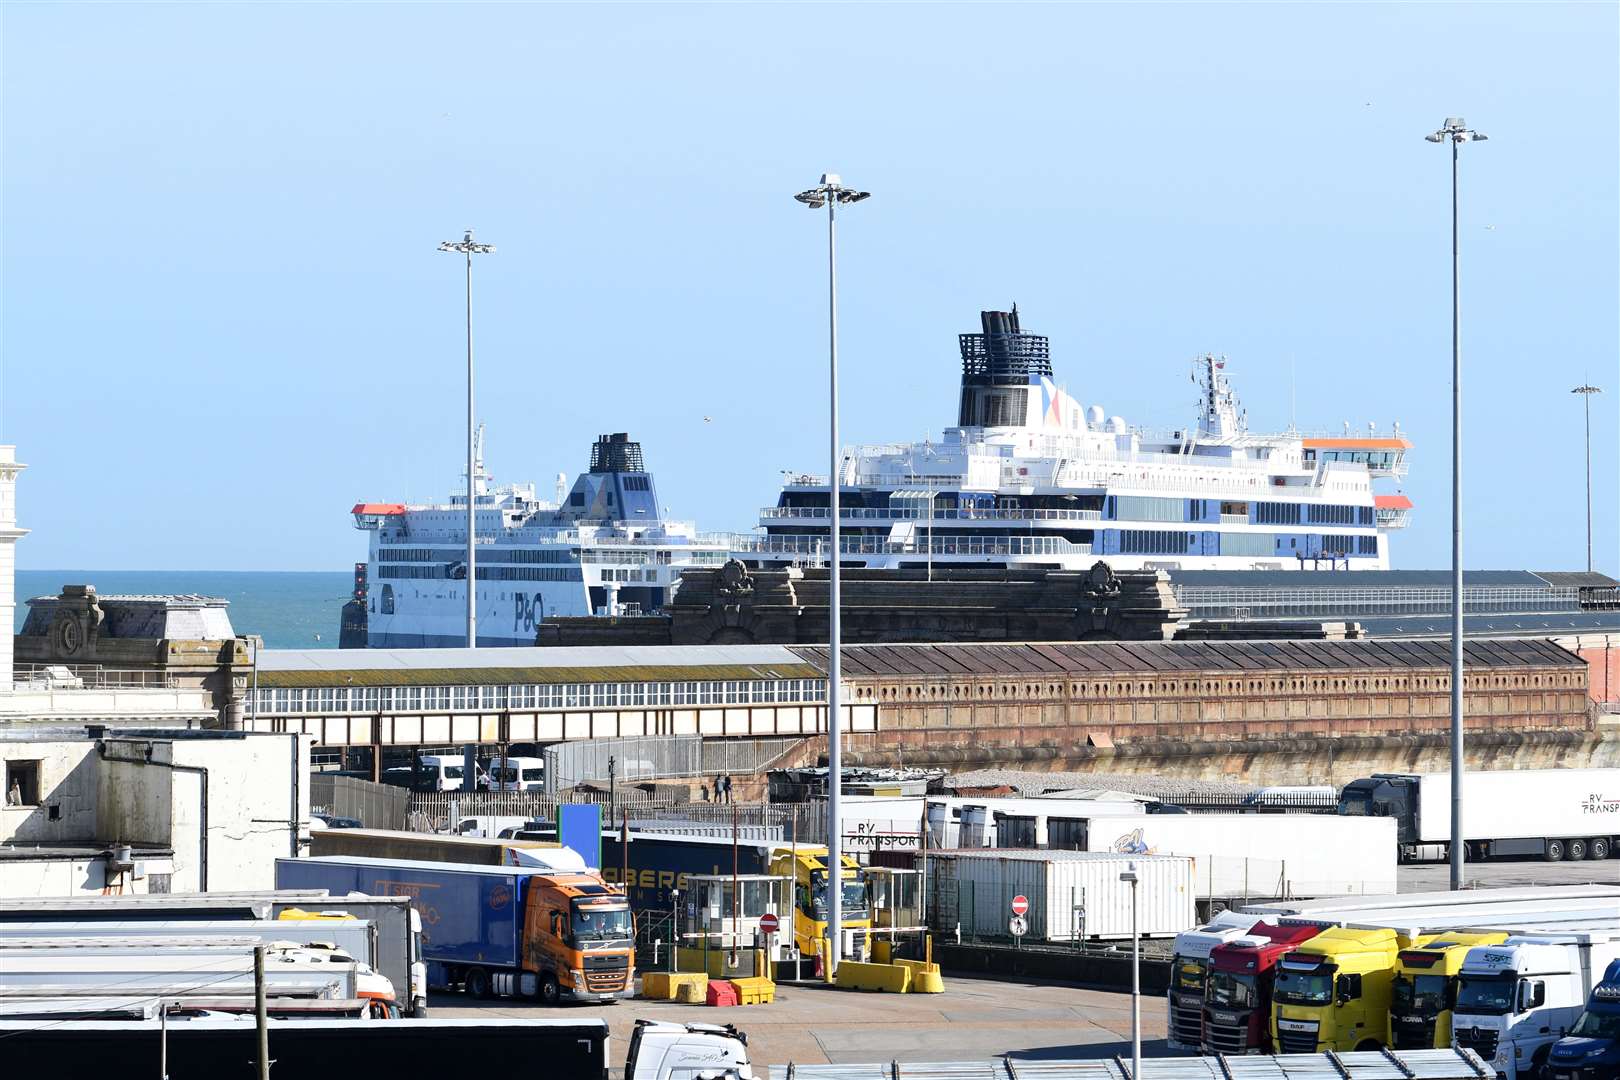 There are long delays at The Port of Dover